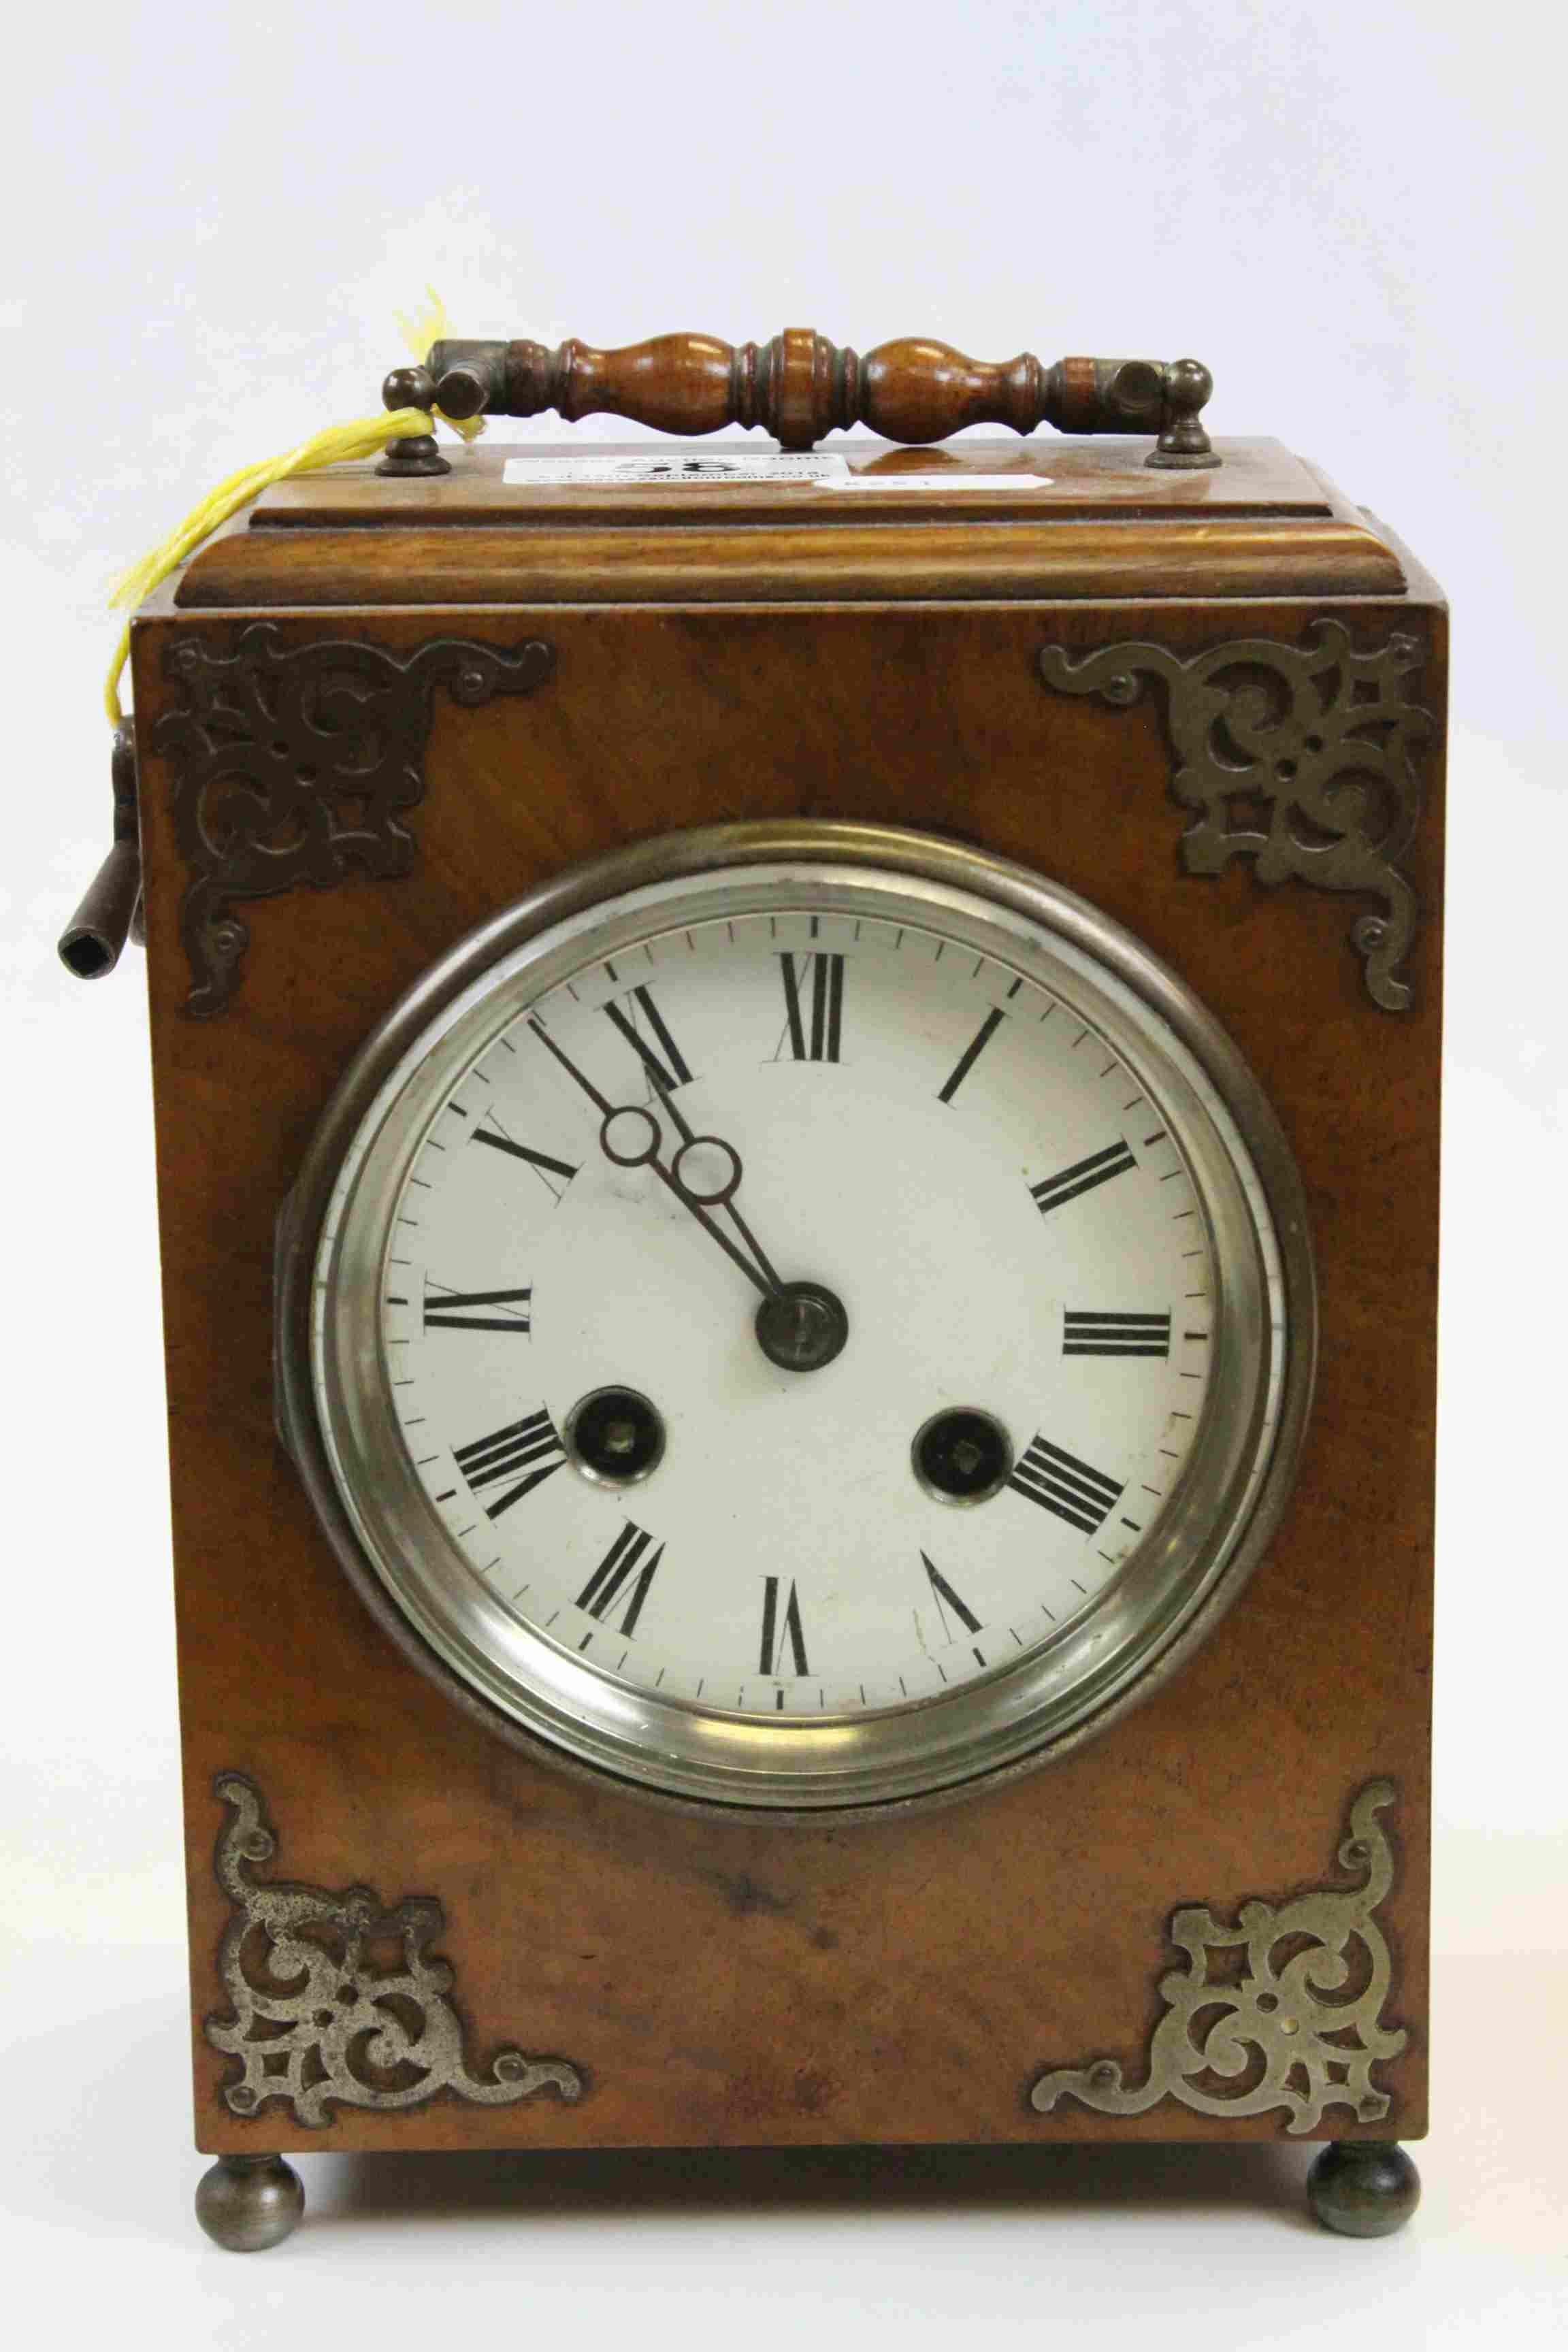 Wooden cased Key wind mantle clock with enamel dial, Brass fittings and Key - Image 3 of 5